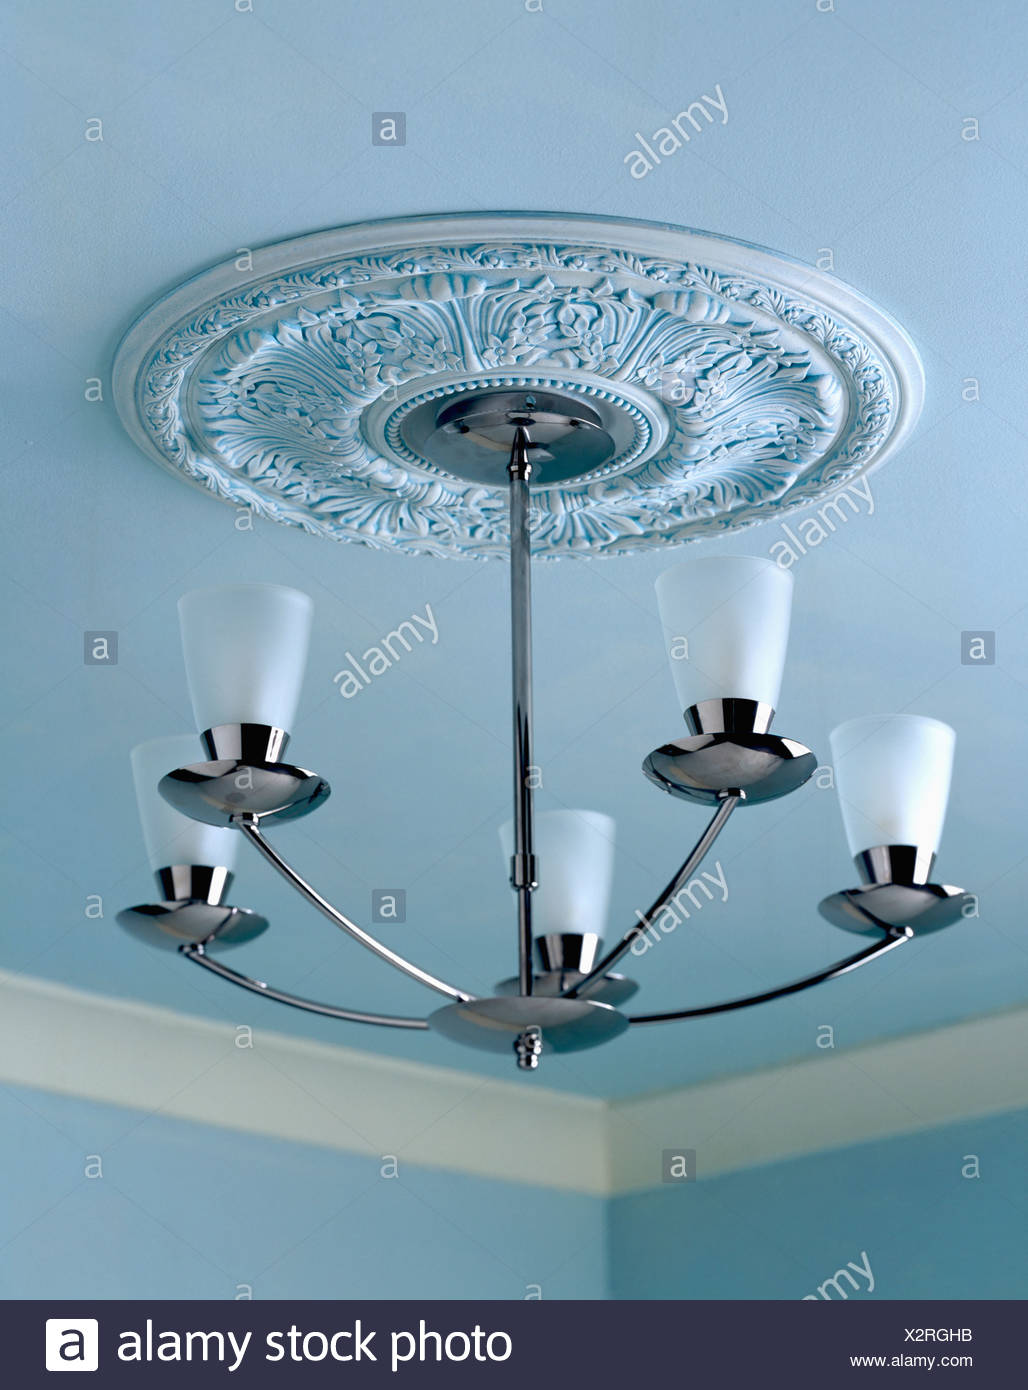 Plaster Ceiling Rose And Modern Chrome And Glass Light